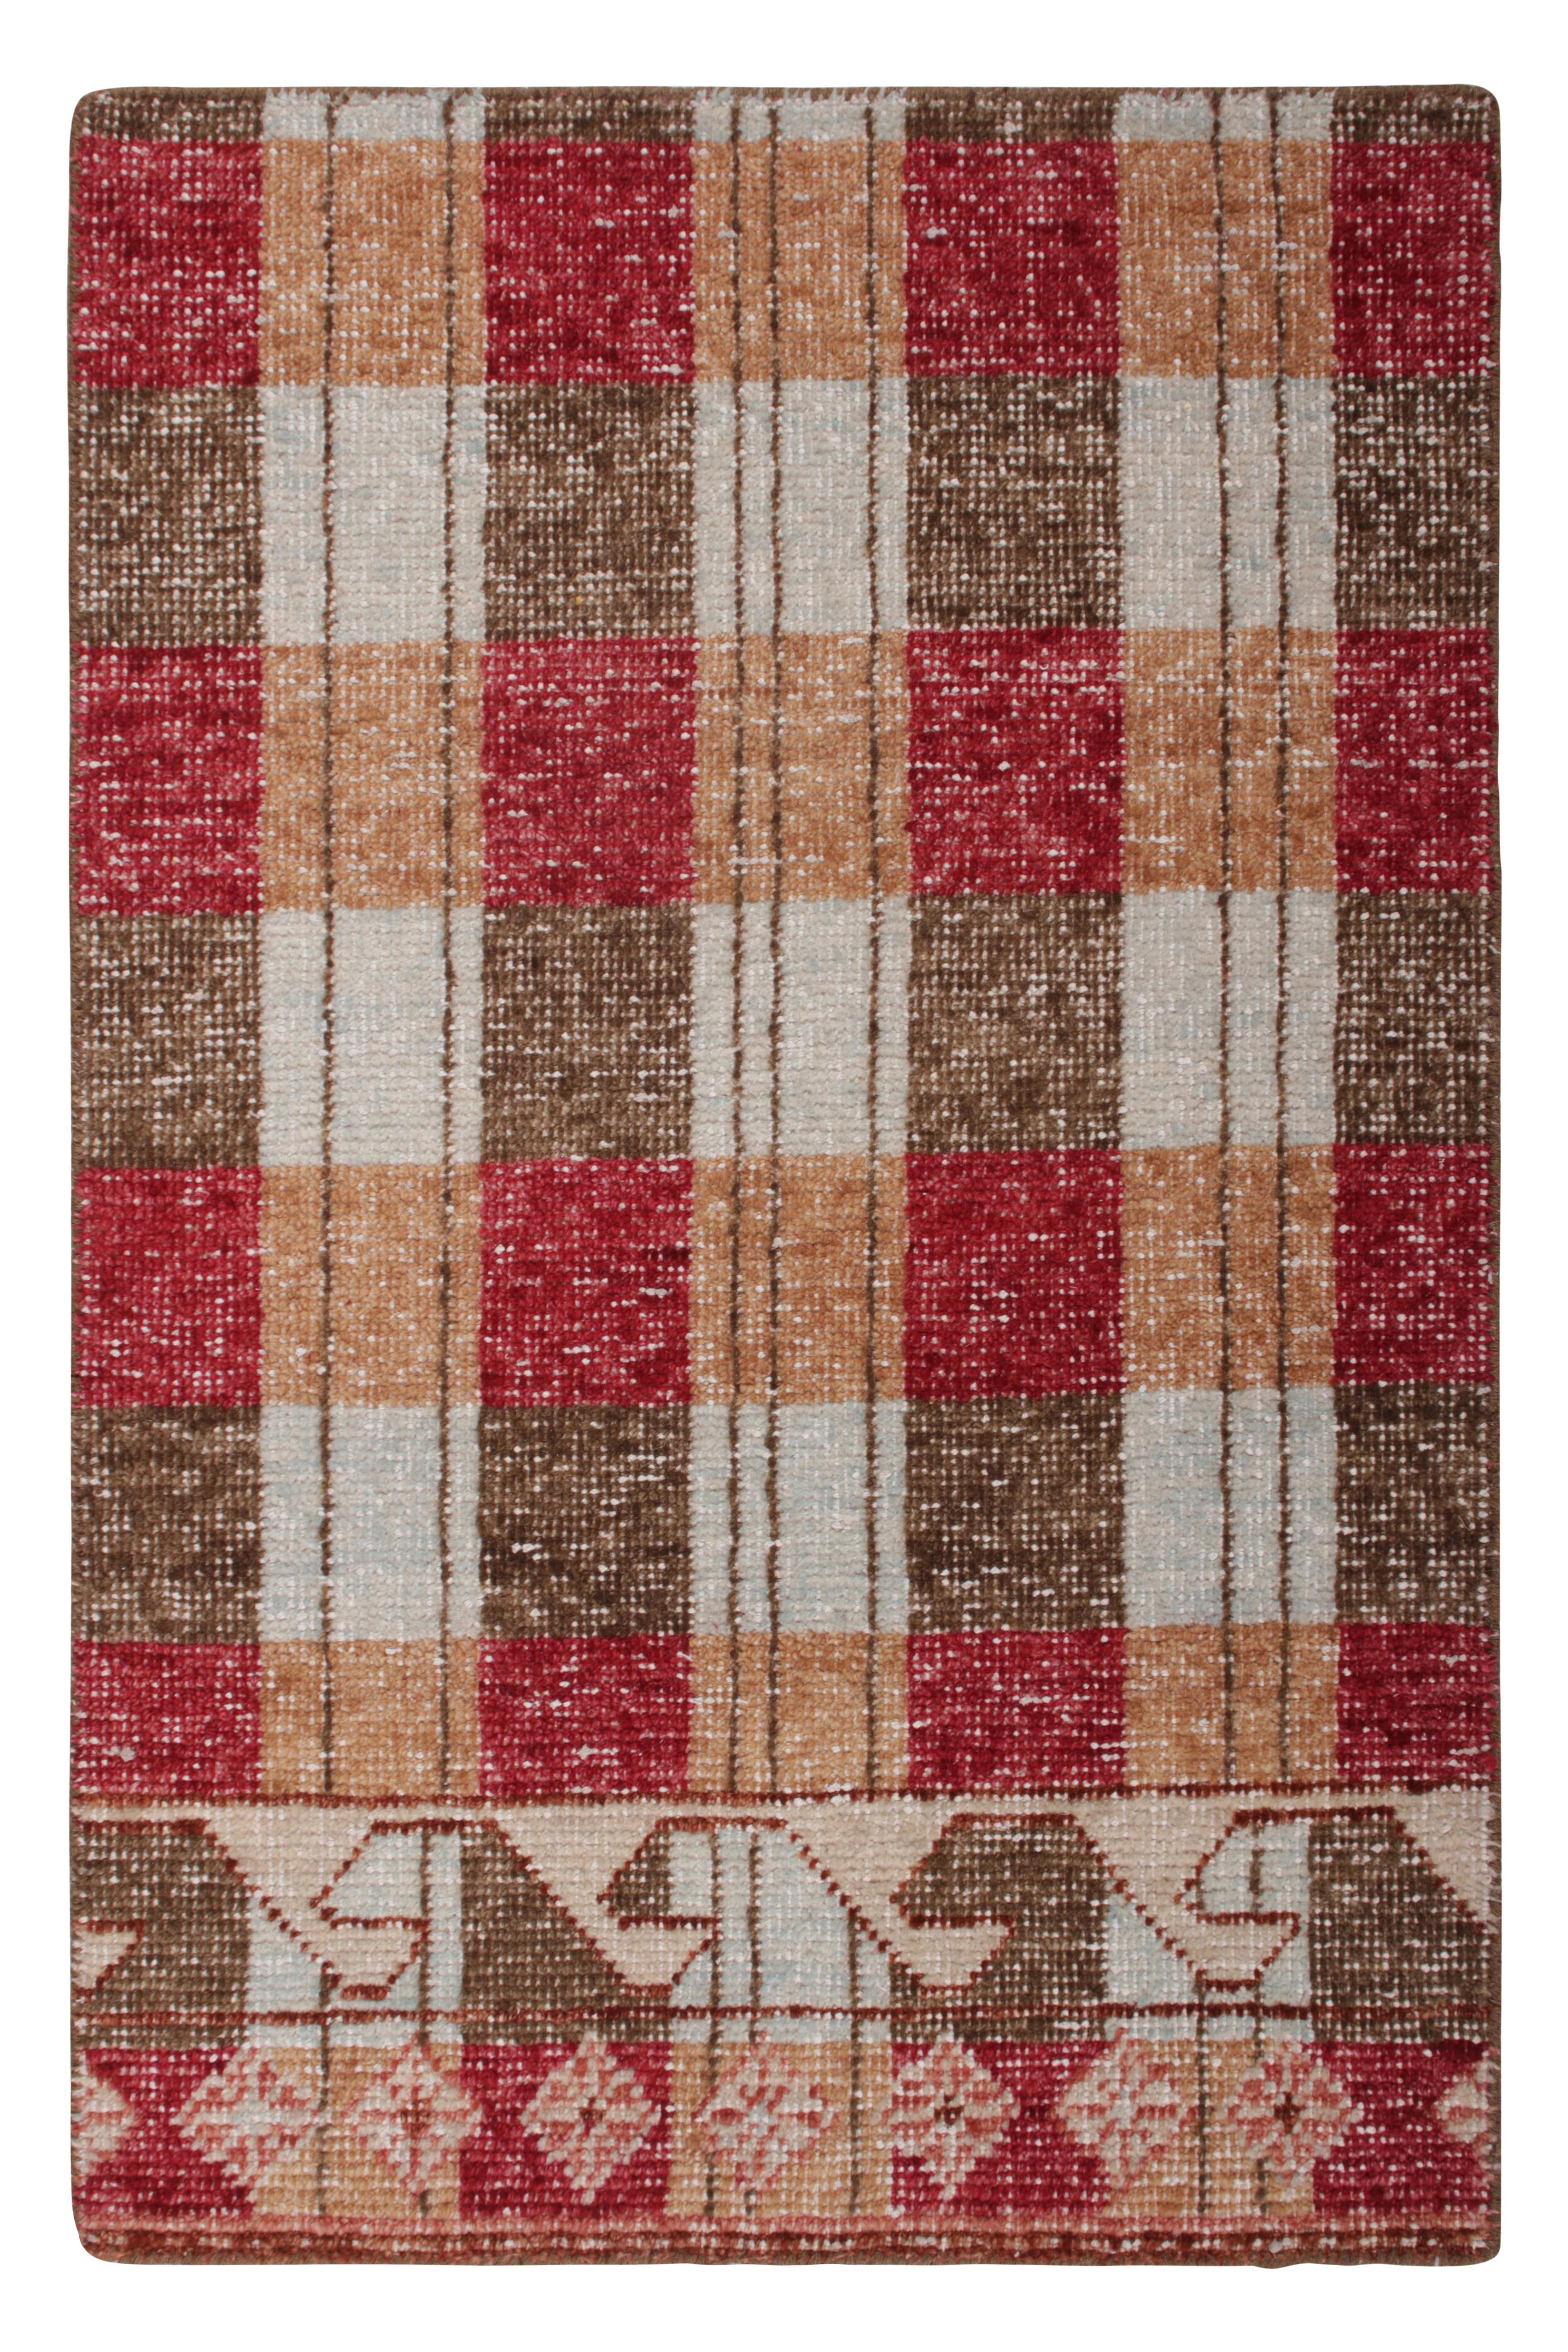 Modern Rug & Kilim’s Distressed Style Gift-Size Rug in Beige-Brown, Red and Blue For Sale